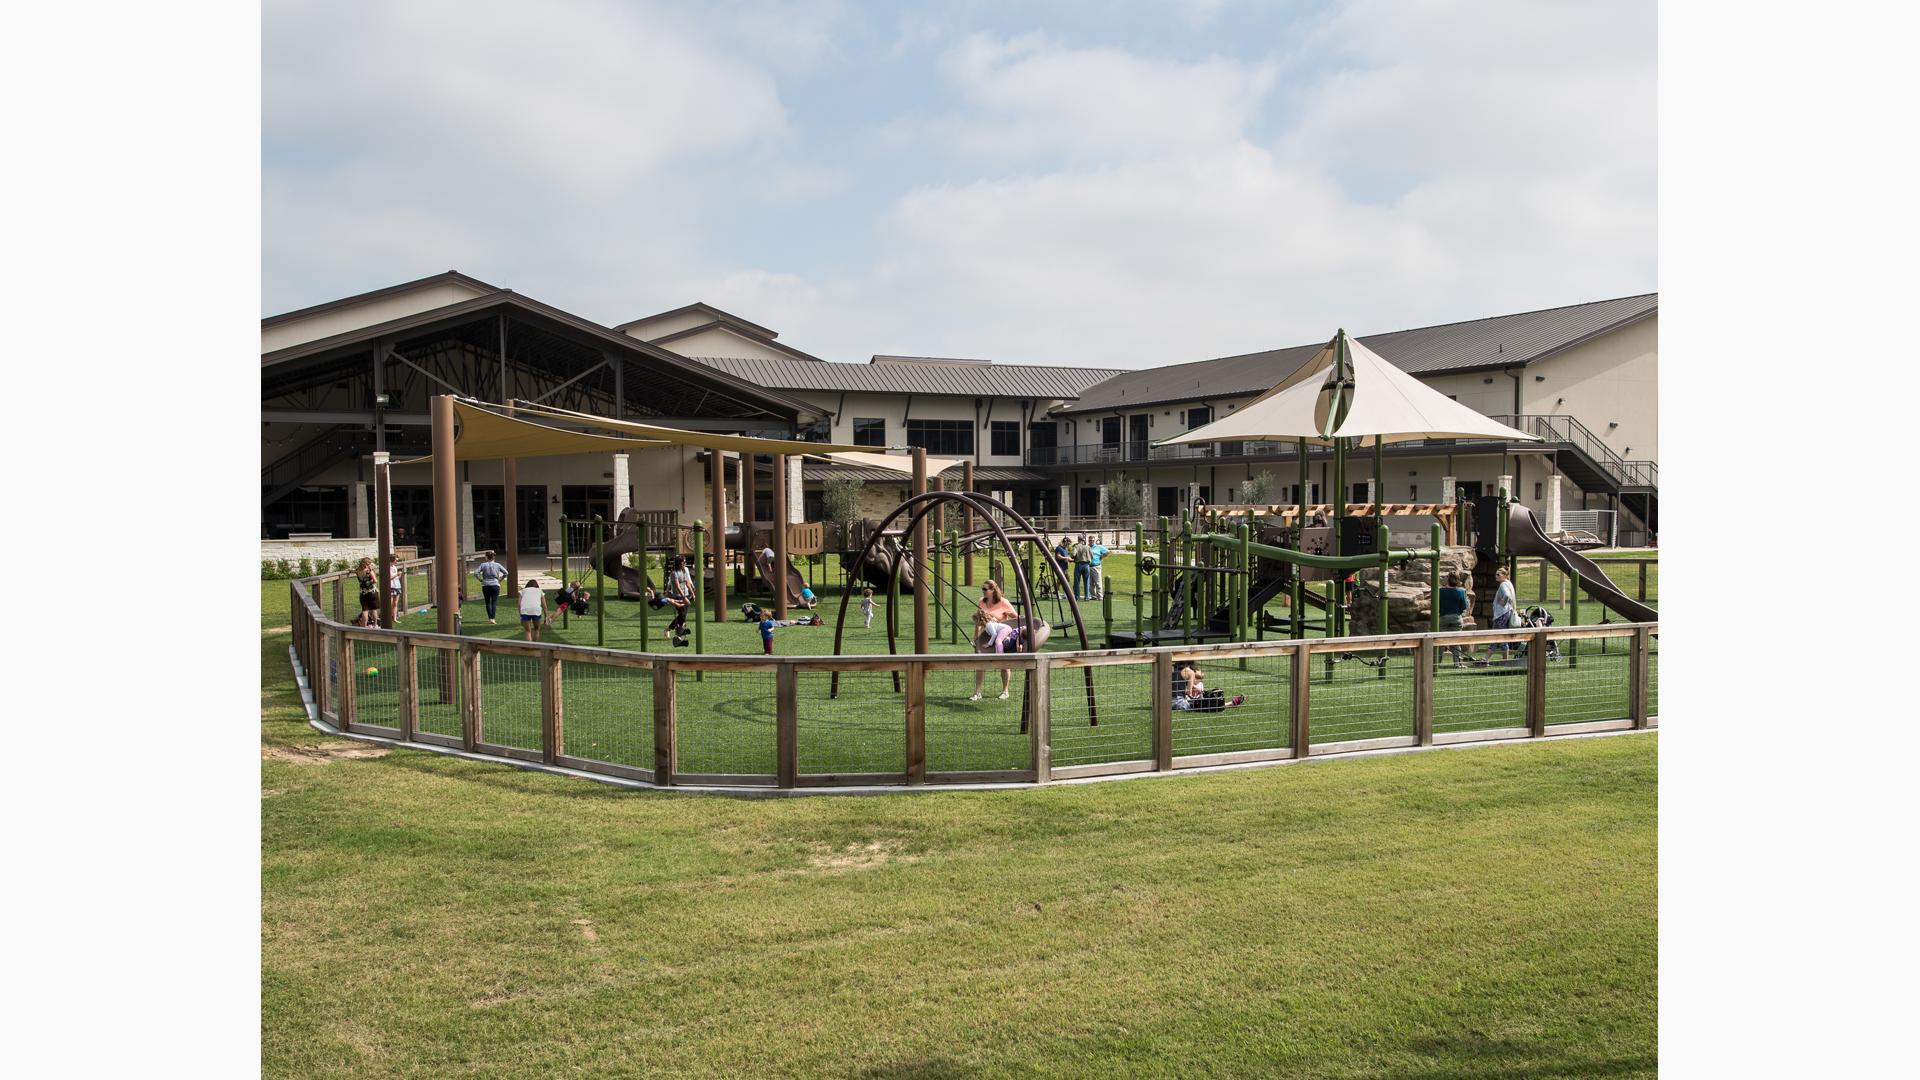 Families play on a sunny day in green grass at Grace Bible Church. SkyWays shade canopies covering parts of the playground. The church looms in the background.